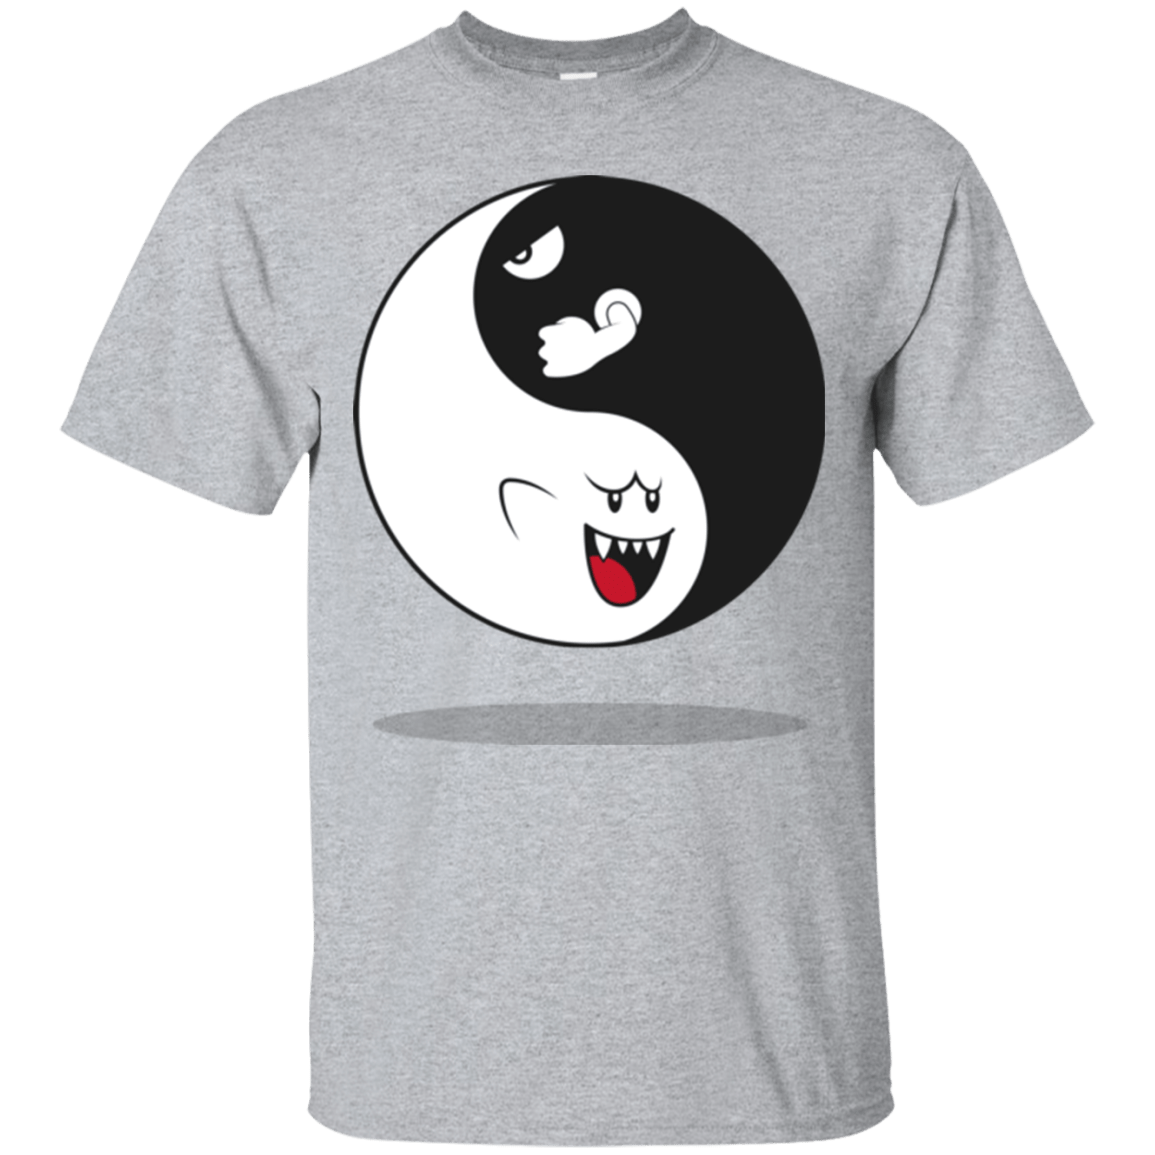 T-Shirts Sport Grey / Small Shy and Angry T-Shirt